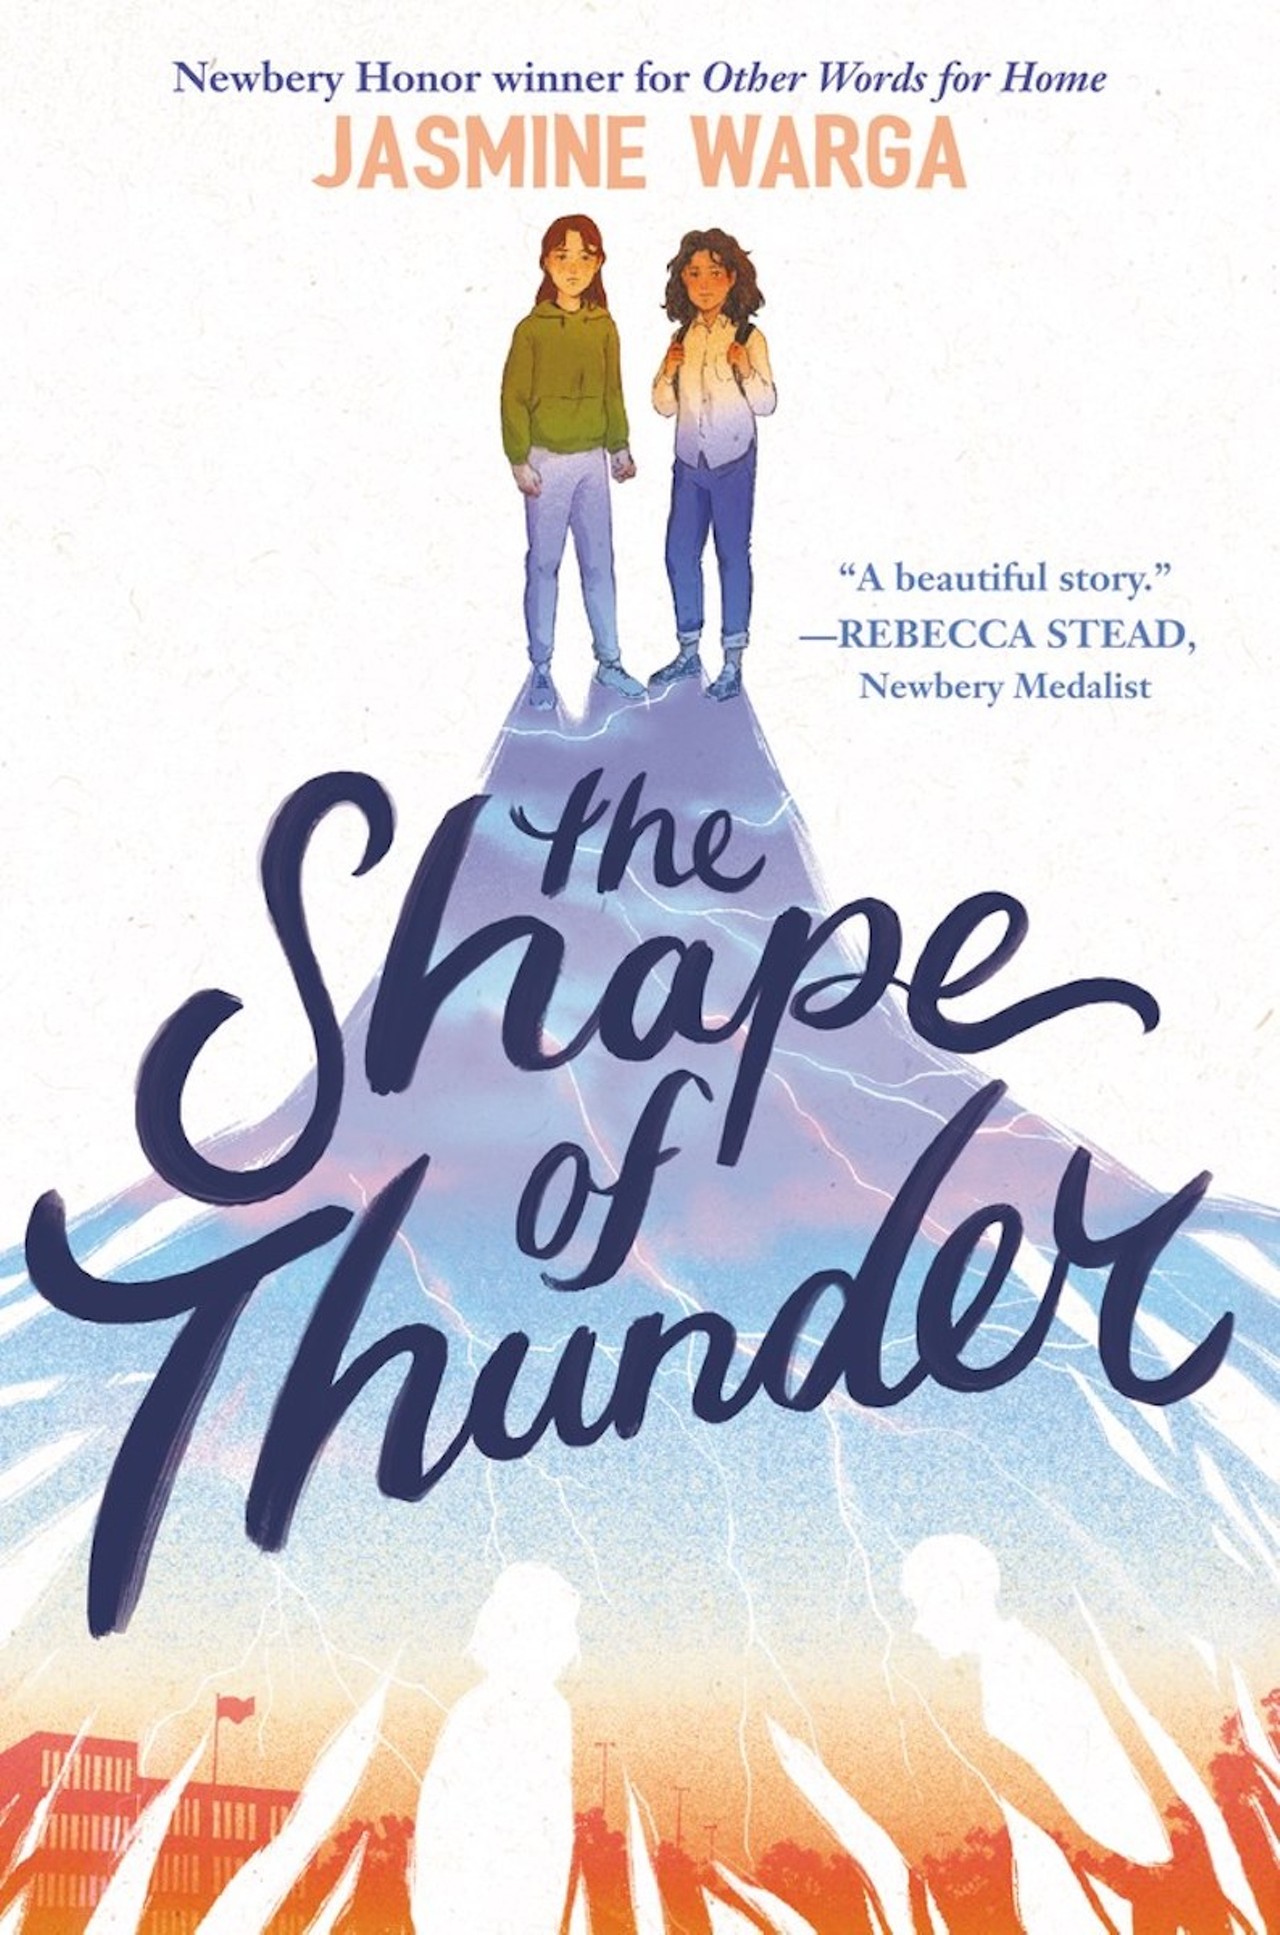 The Shape of Thunder by Jasmine Warga 
Also recognized in the Ohioana Awards was Jasmine Warga for her middle grades book The Shape of Thunder, which tackles tough topics with grace. The book follows Cora and Quinn, best friends and next-door neighbors who haven’t spoken in a year; they’re both navigating grief in the aftermath of a school shooting. But when the pair come together to try to turn back time, they might just re-find friendship.
Though Warga now lives in Chicago, the author shouts out the Queen City in the bio on her website: “Like all other people from Cincinnati, I am inordinately proud of my little Midwestern city and think that Graeter’s black raspberry chip ice cream is the most delicious food in the whole world.” We agree, Jasmine!